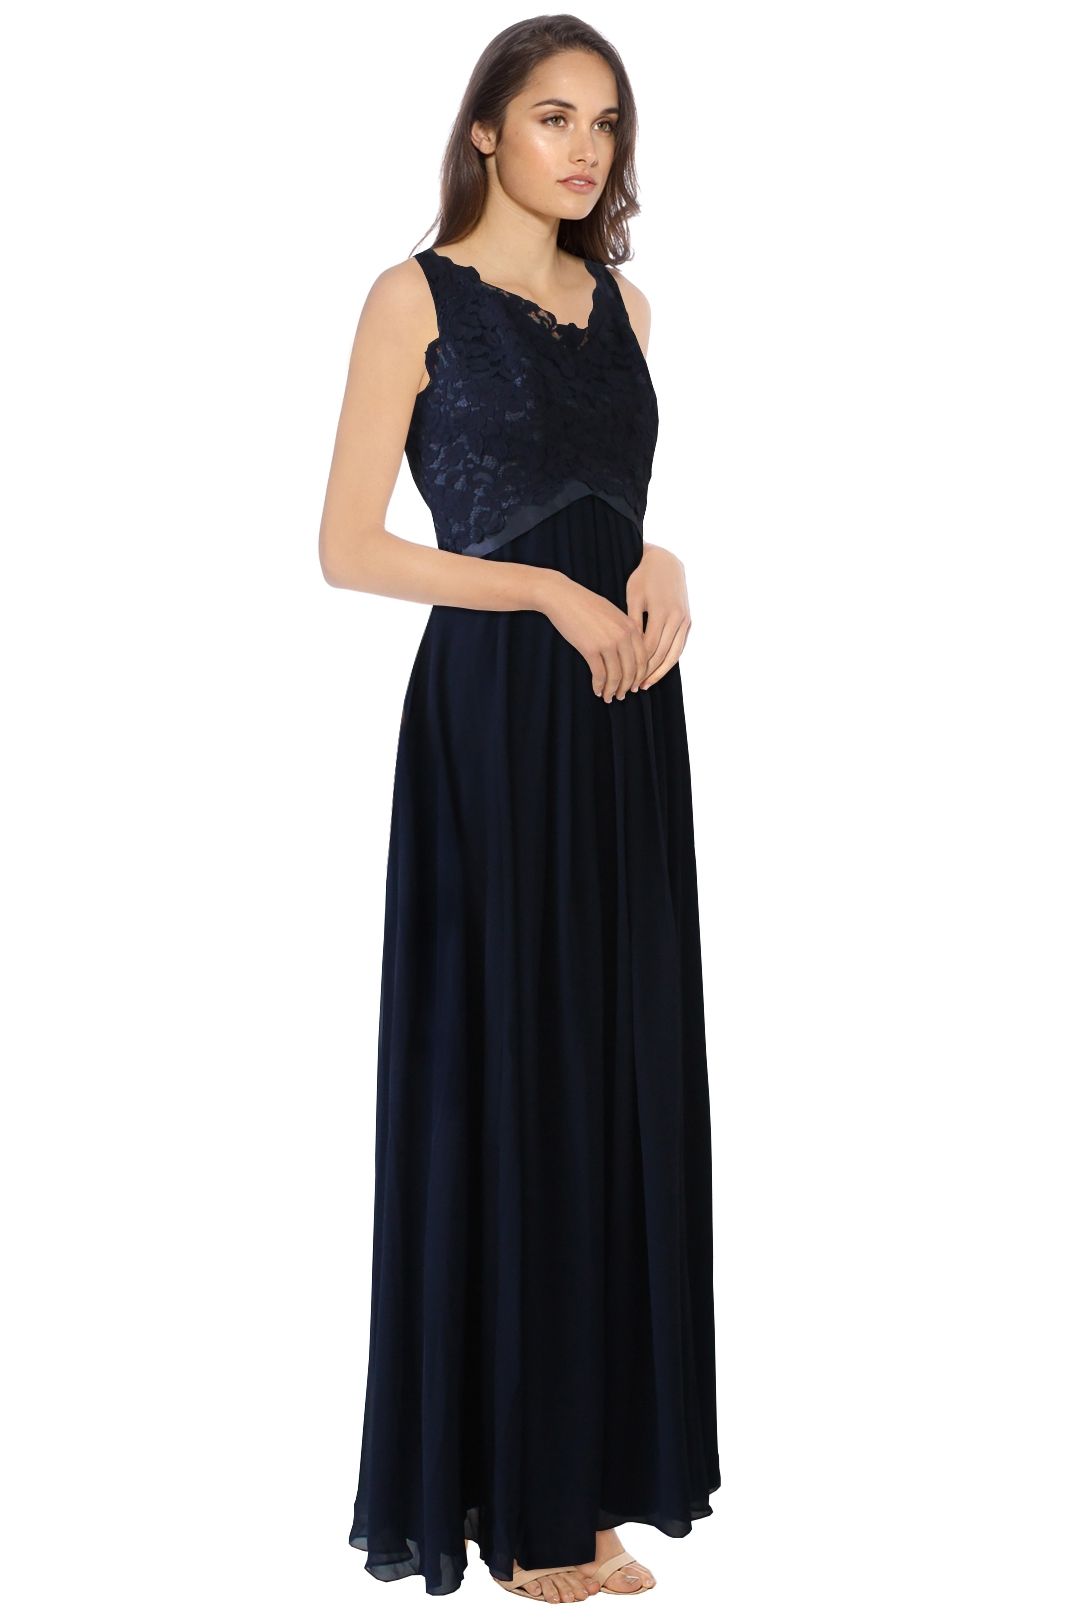 The Dress Shoppe - Share This Elegance - Navy - Side